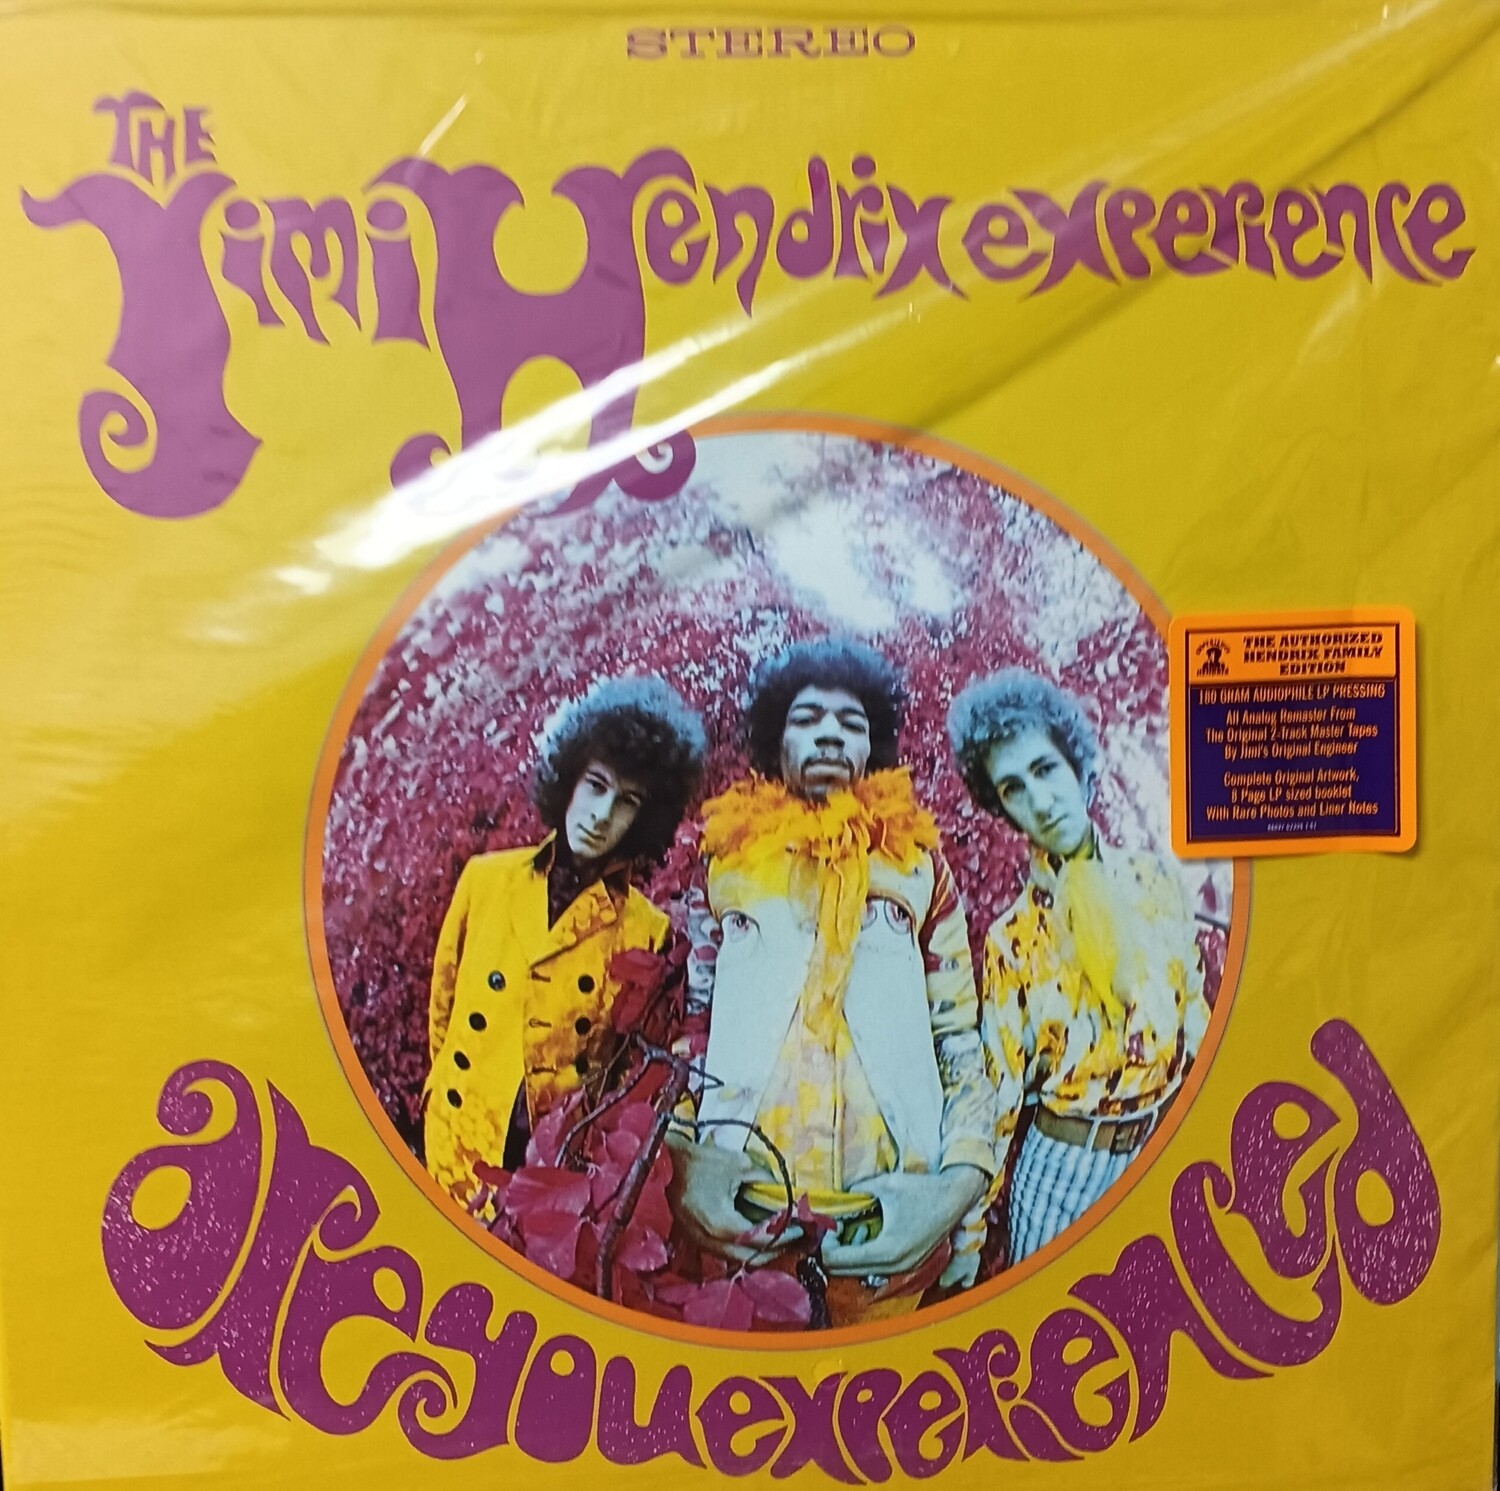 JIMI HENDRIX EXPERIENCE - Are you experienced